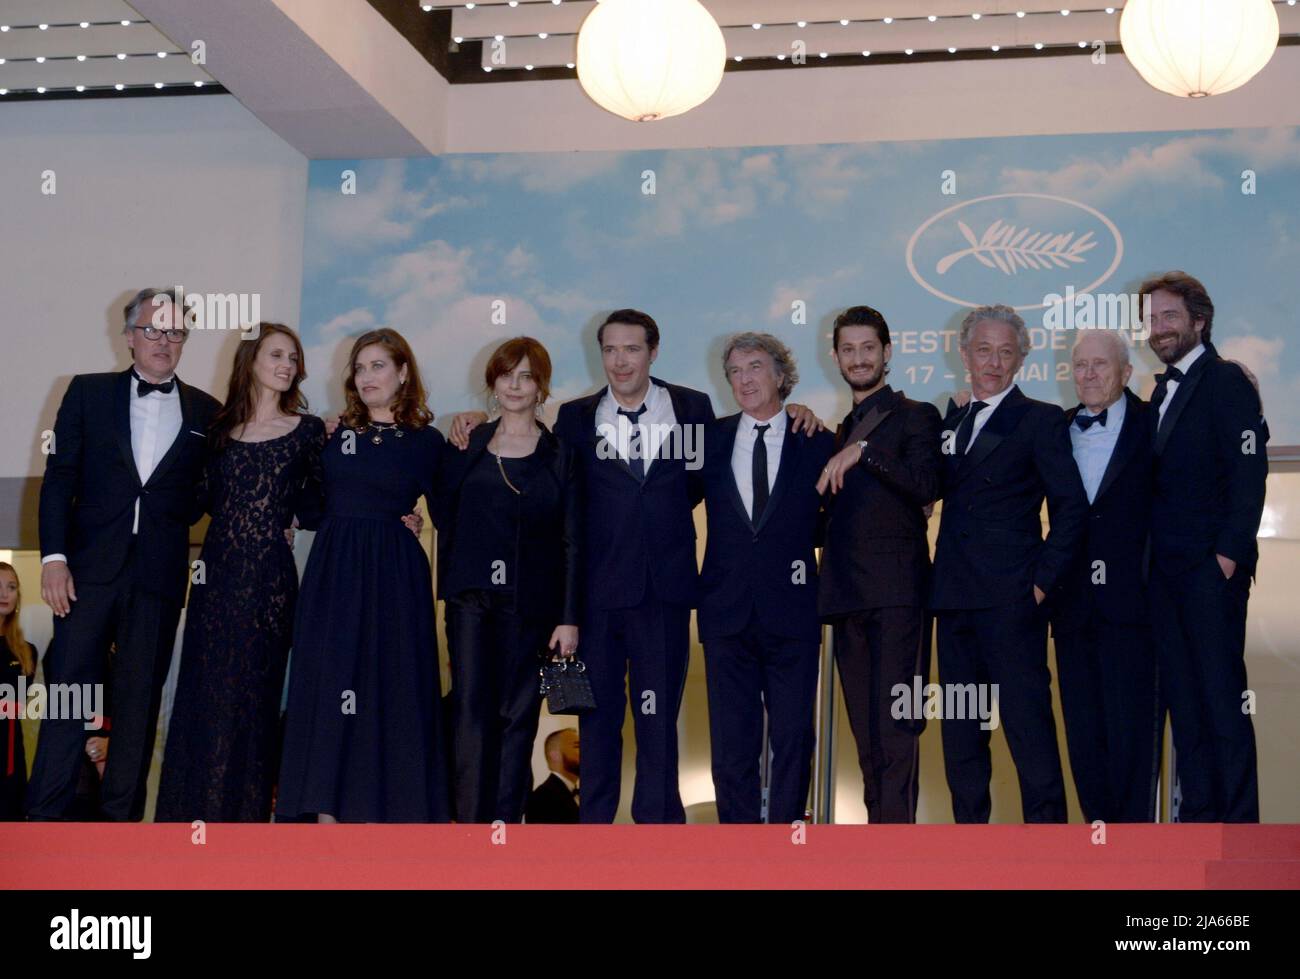 May 27, 2022, CANNES, France: CANNES, FRANCE - MAY 27: (L to R) FranÃ§ois Kraus, Marine Vacth, Emmanuelle Devos, Laura Morante, Director Nicolas Bedos, FranÃ§ois Cluzet, Pierre Niney, guest, JÃ©rÃ´me Seydoux and Denis Pineau-Valencienne attend the screening of ''Mascarade'' during the 75th annual Cannes film festival at Palais des Festivals on May 27, 2022 in Cannes, France. (Credit Image: © Frederick Injimbert/ZUMA Press Wire) Stock Photo